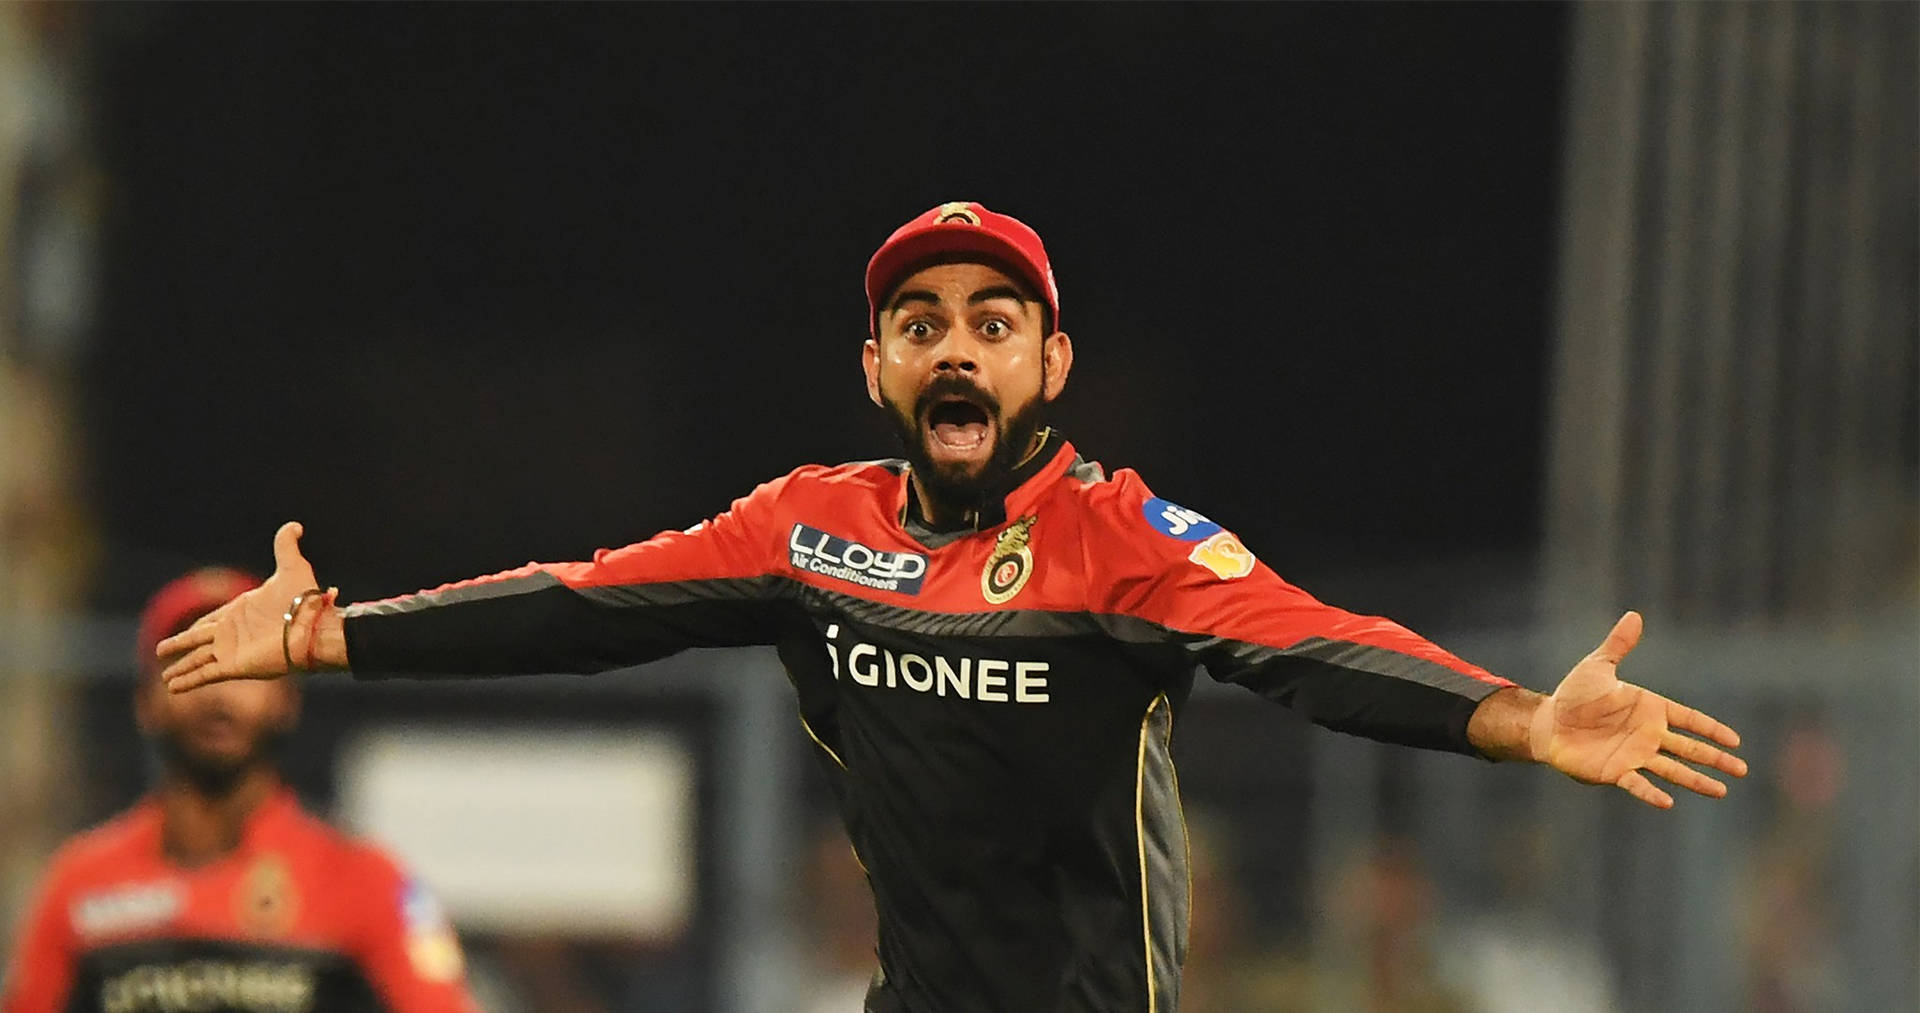 RCB Team Kohli Arms Outstretched Wallpaper